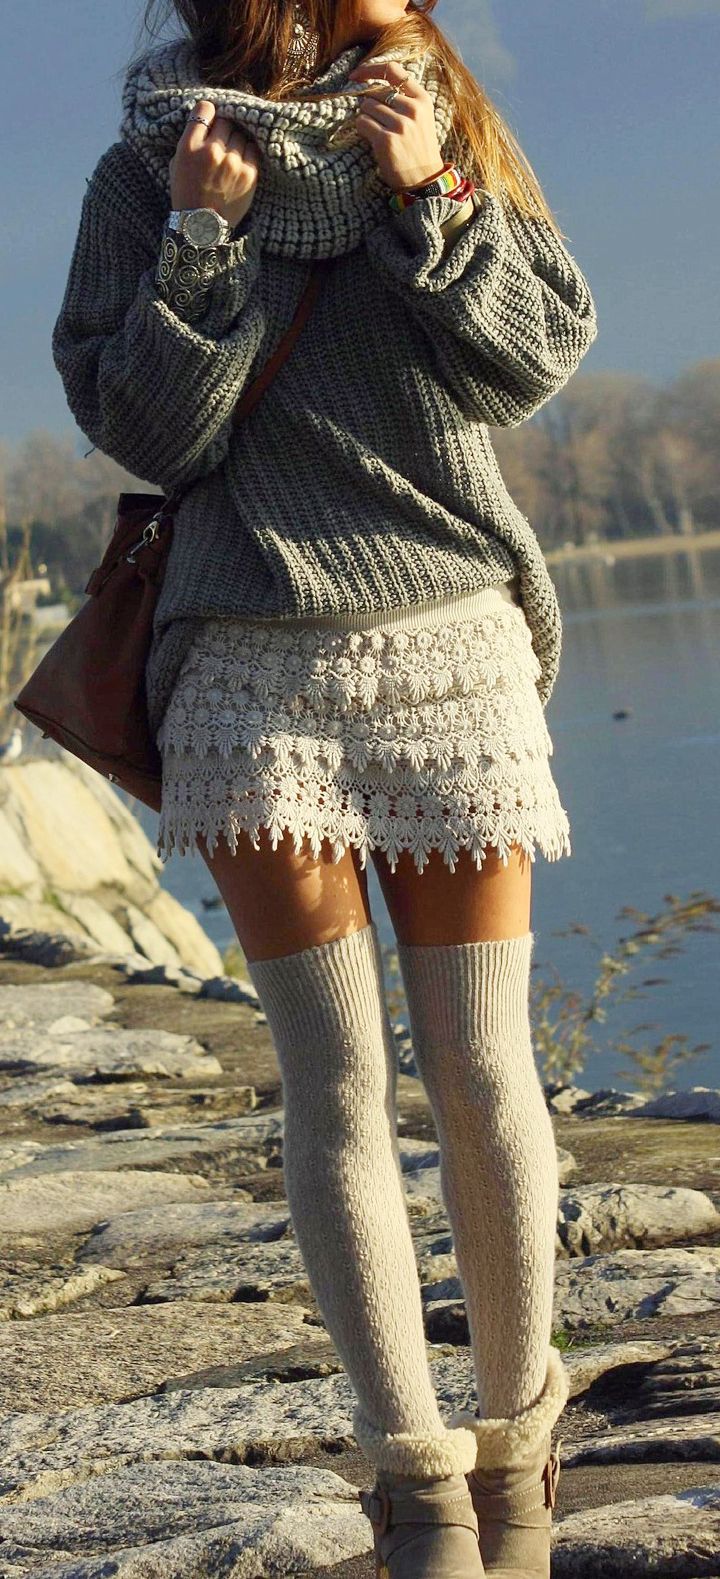 Street fashion crochet skirt and sweater | Just a Pretty Style